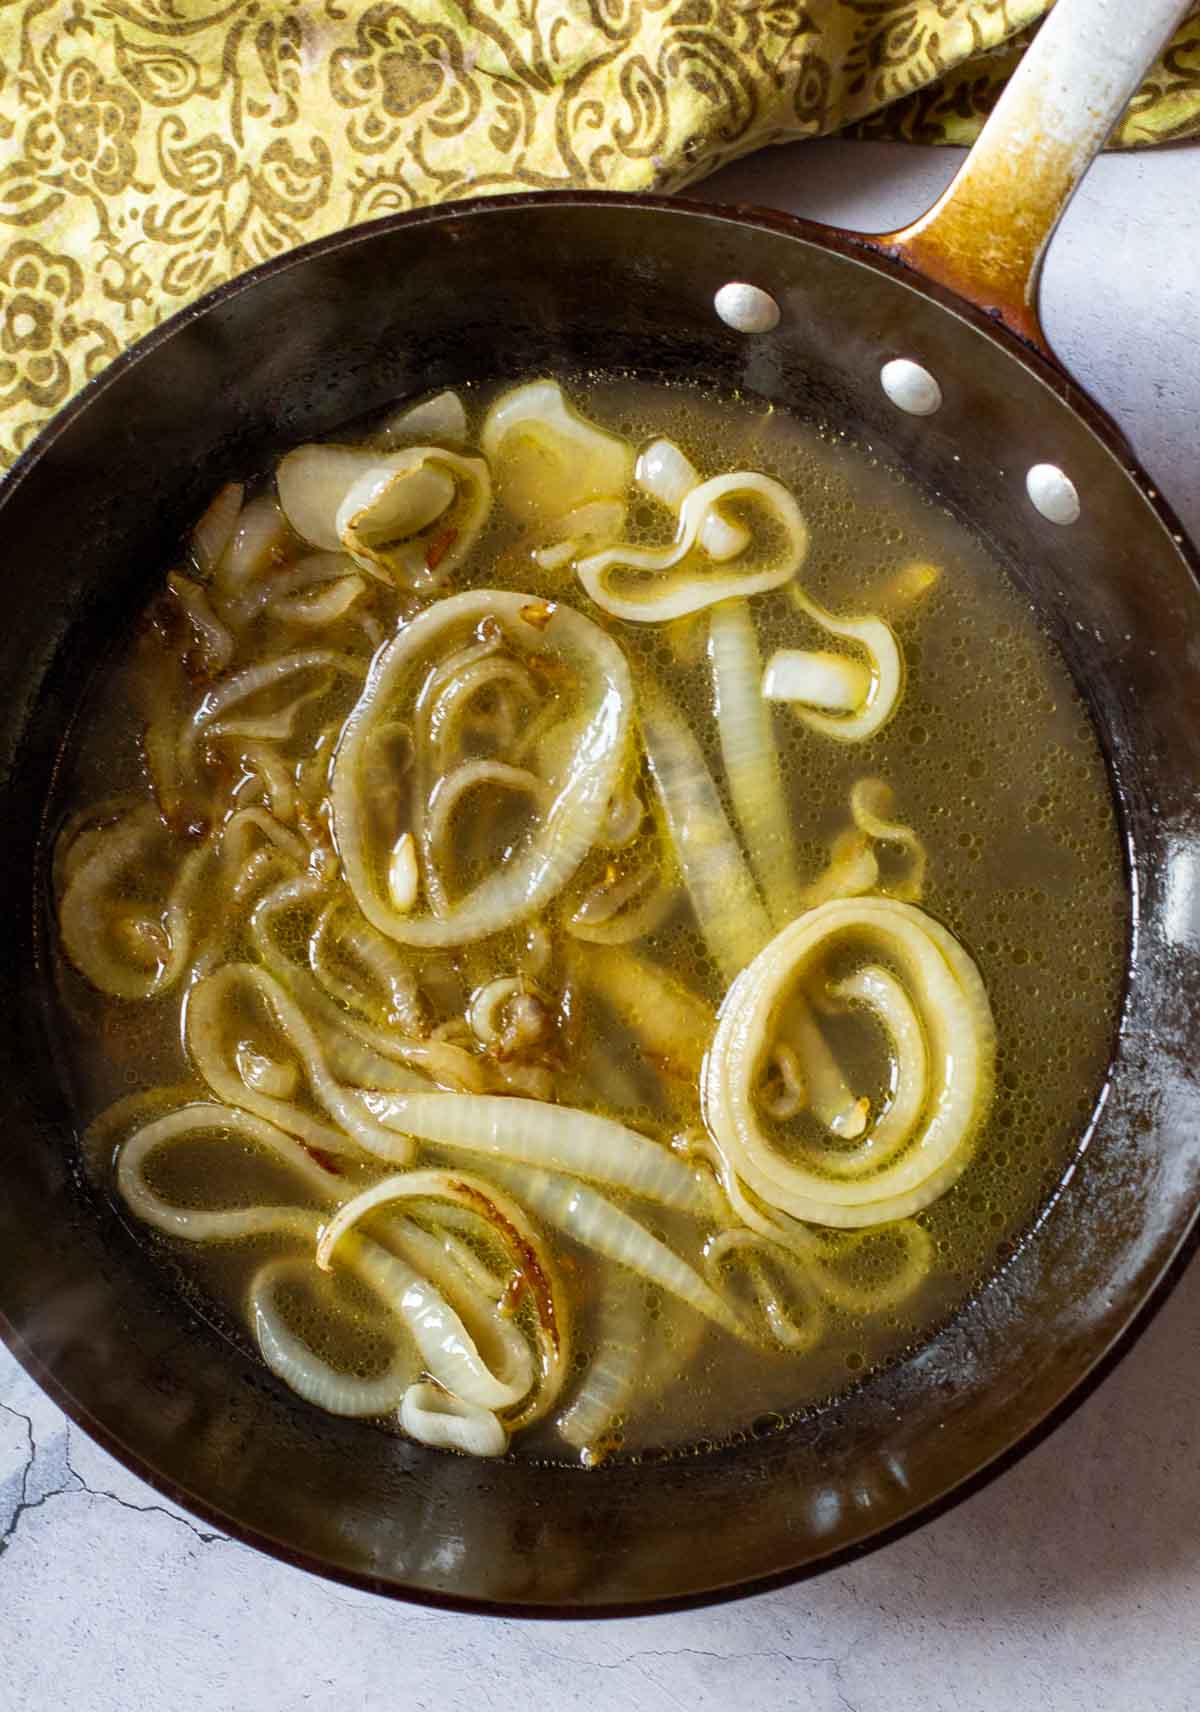 Adding beer to onions to make brats and kraut.